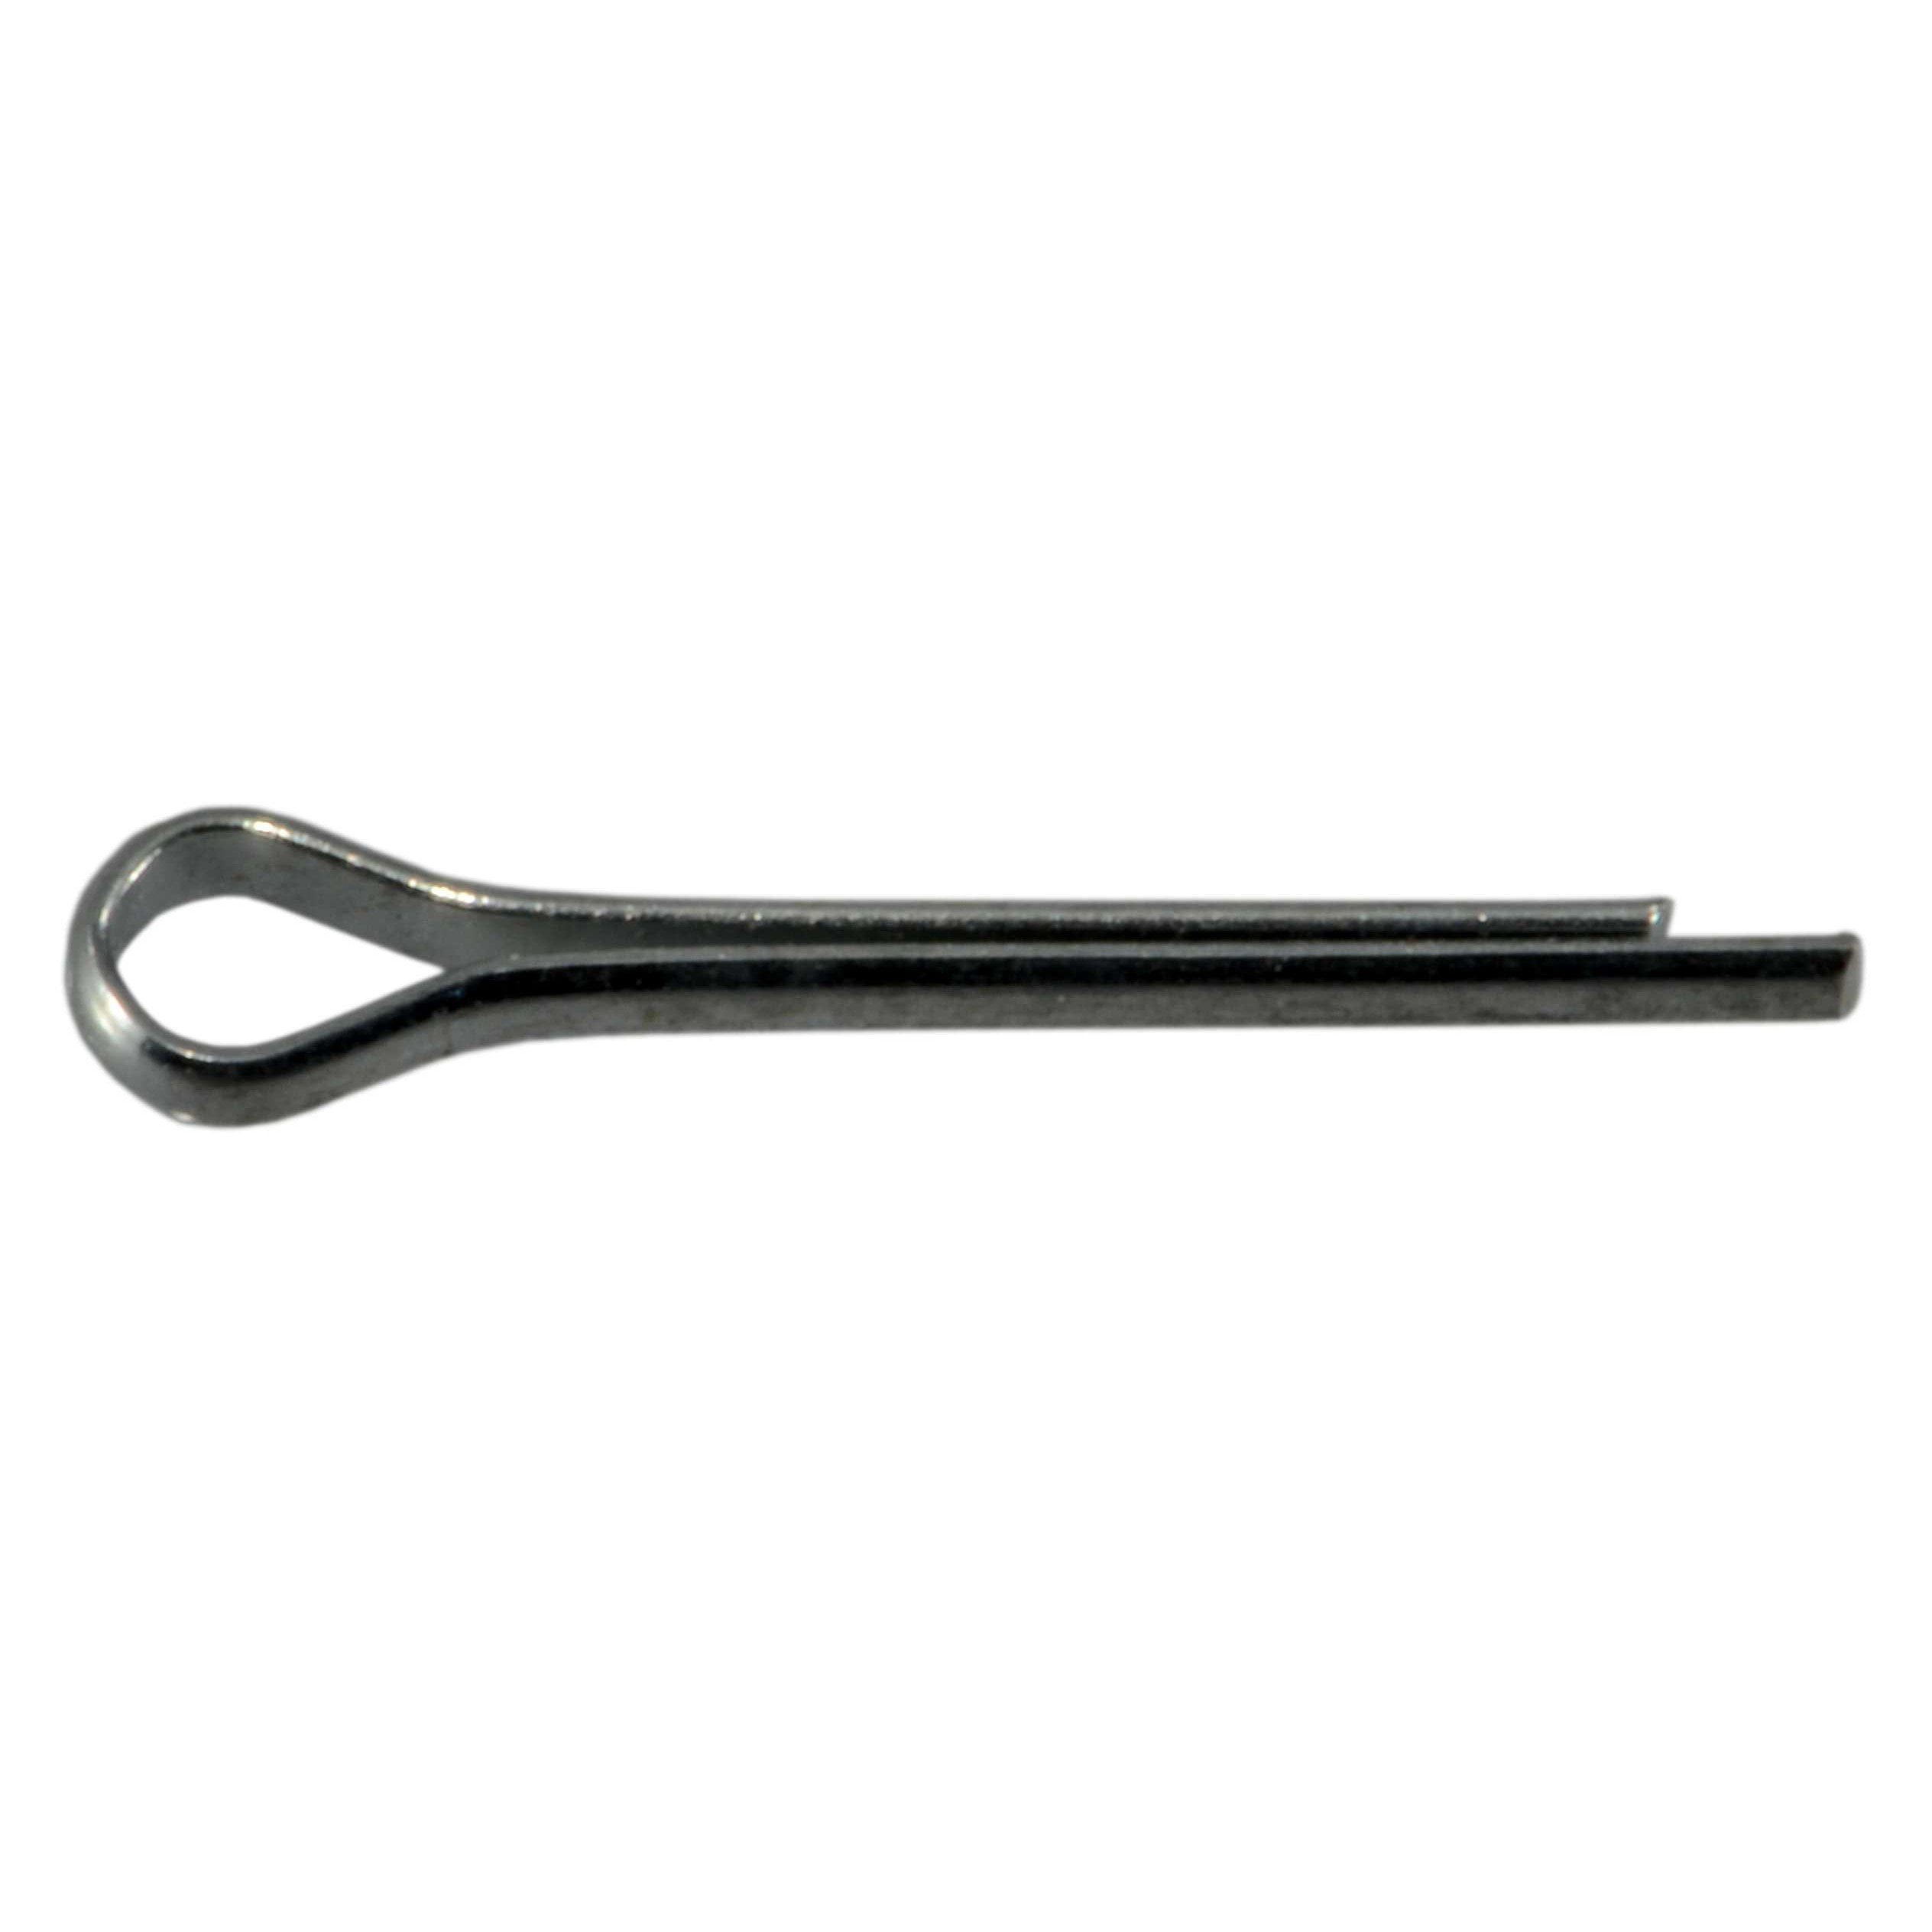 100 1/16X1" COTTER PIN EXTENDED PRONG STEEL ZINC PLATED